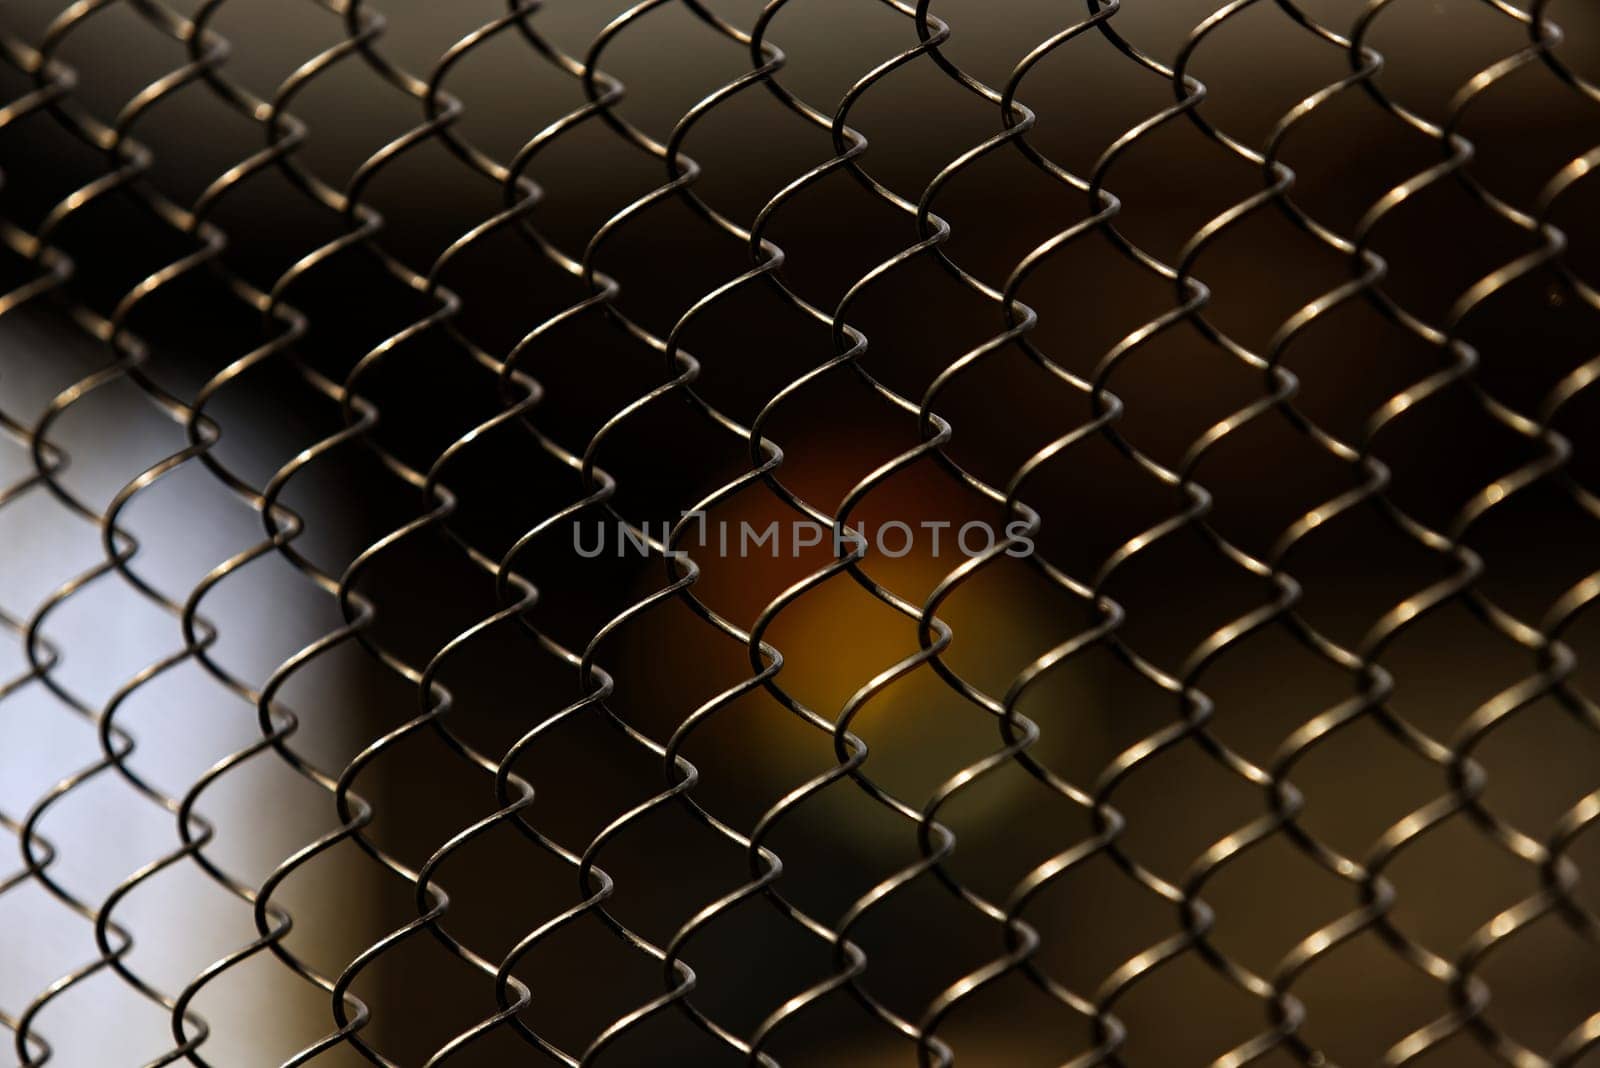 Captivating in its simplicity, this photograph features an array of chain link fences that form a compelling geometric pattern. The composition of the fences creates a harmonious blend of light and shadow, transforming a common, utilitarian object into a work of art. This photo captures the unexpected beauty found in everyday life.